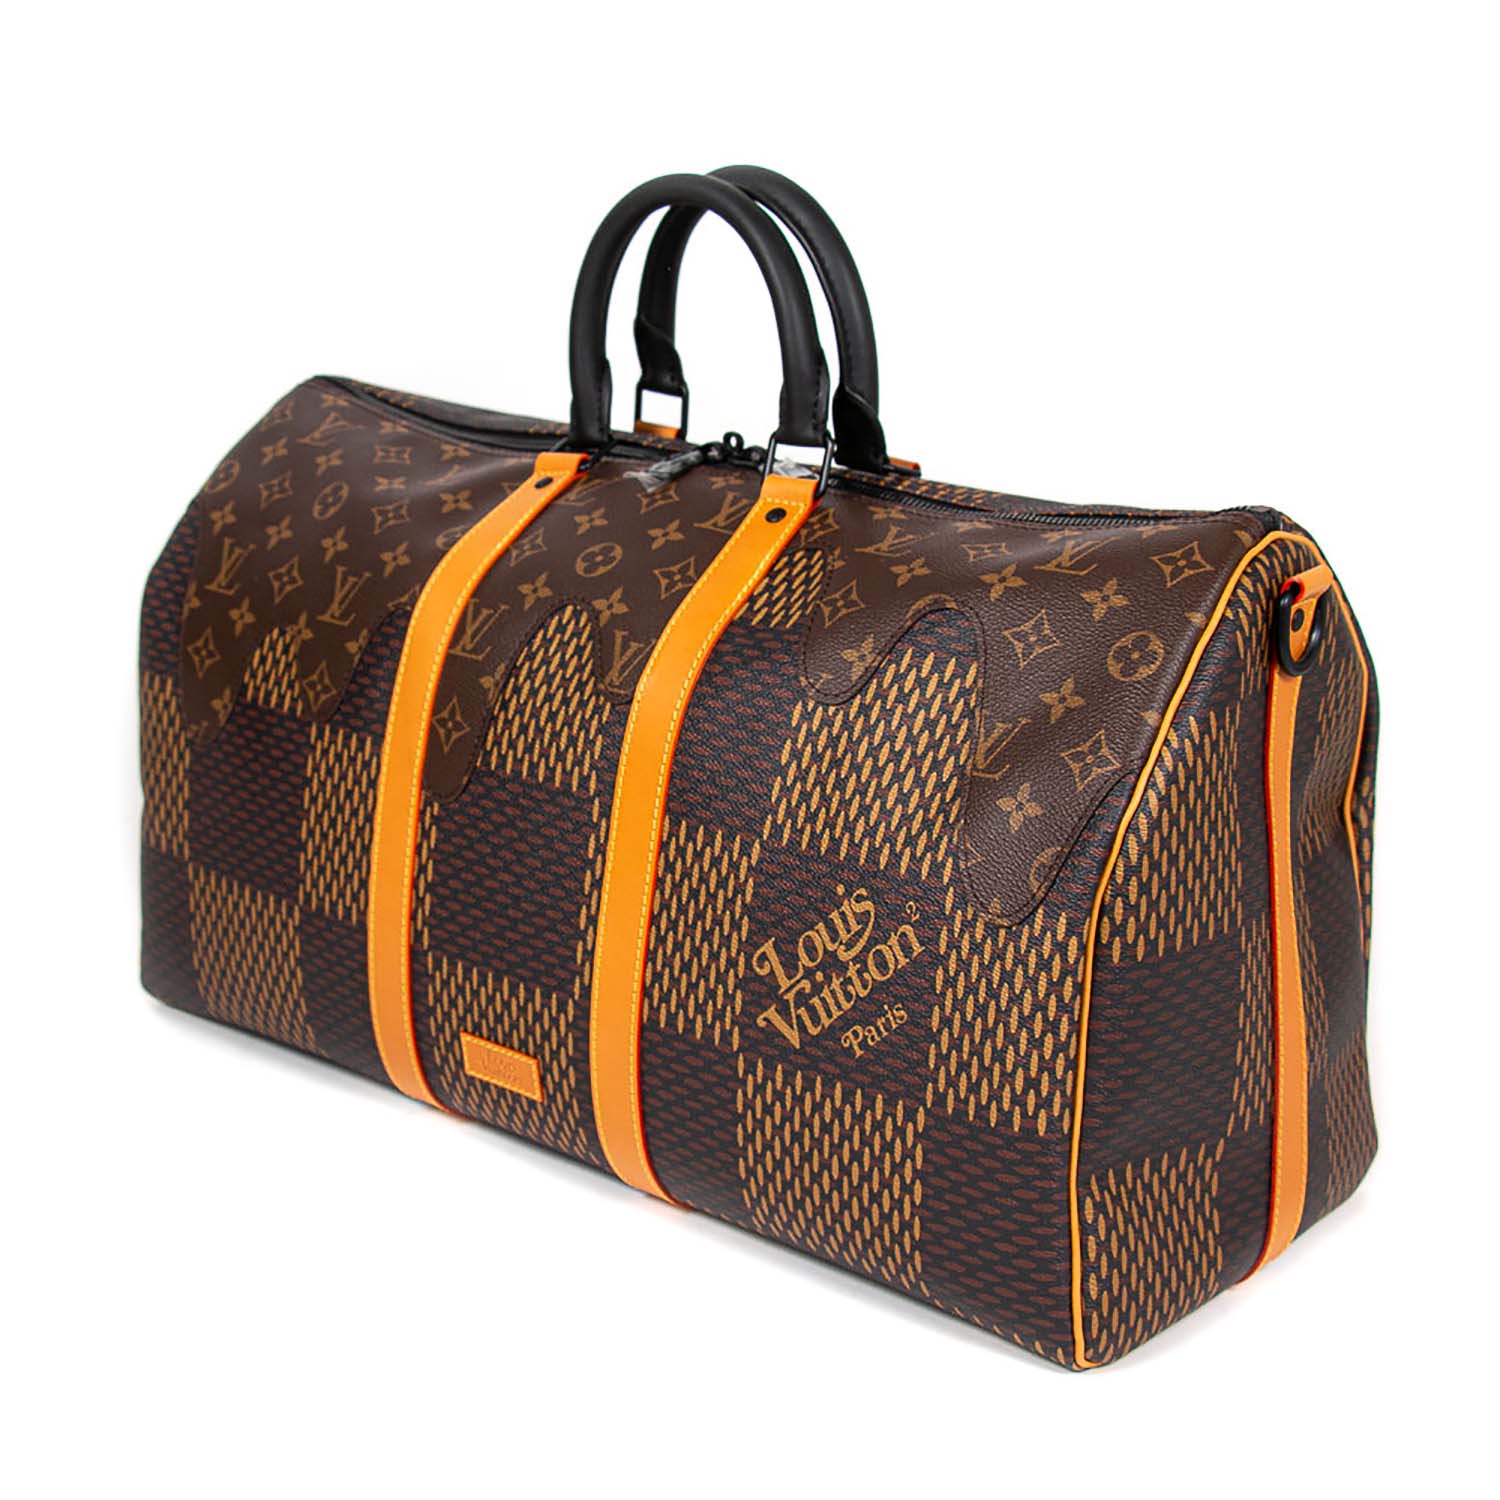 louis-vuitton limited edition